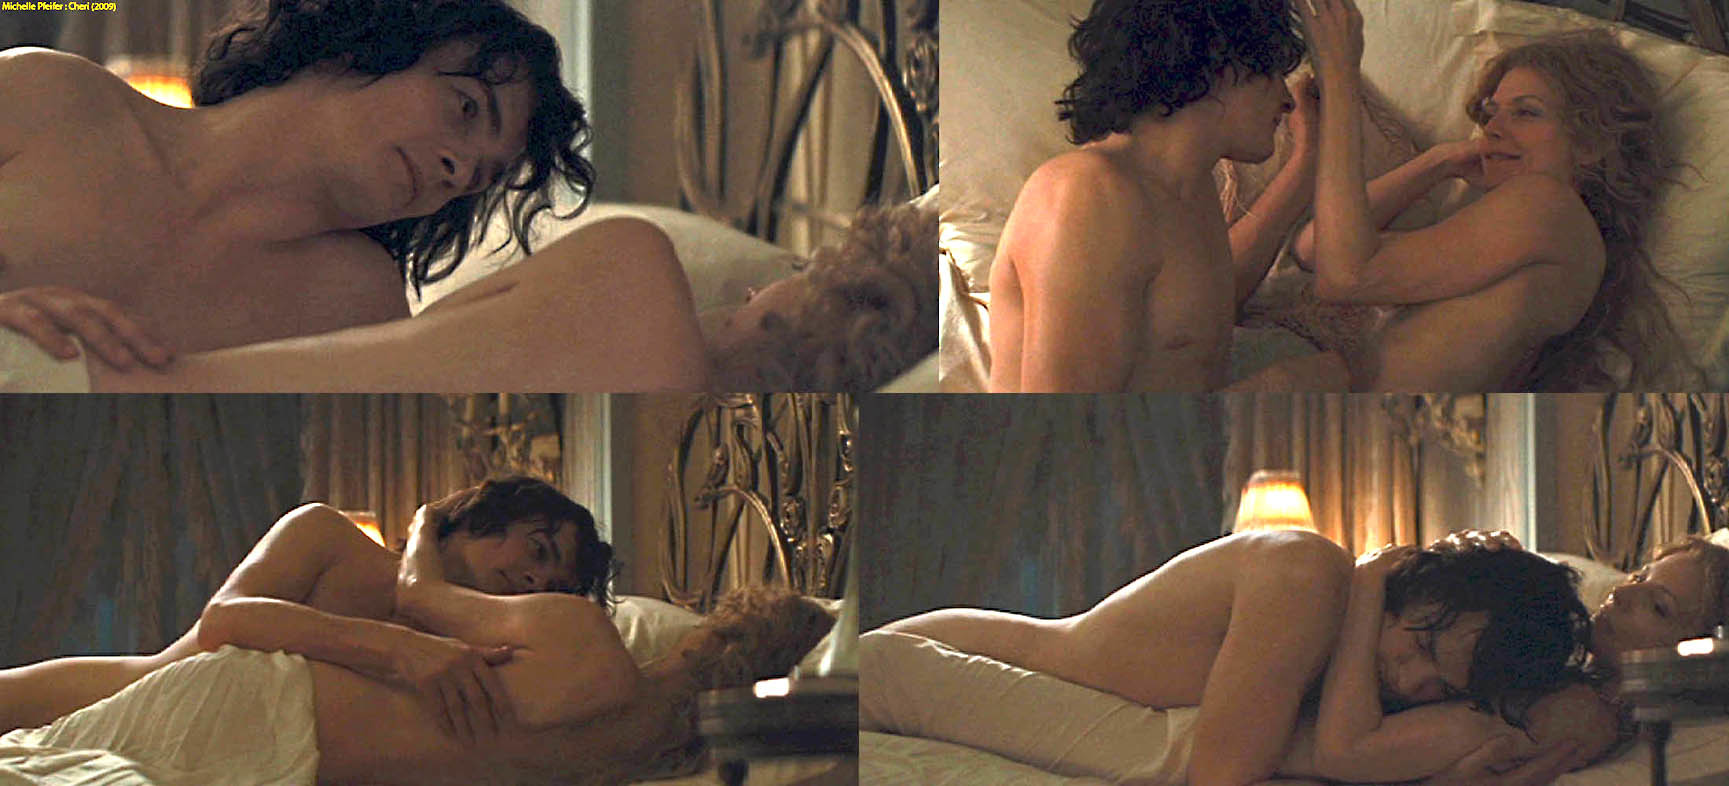 Michelle pfeiffer nude images